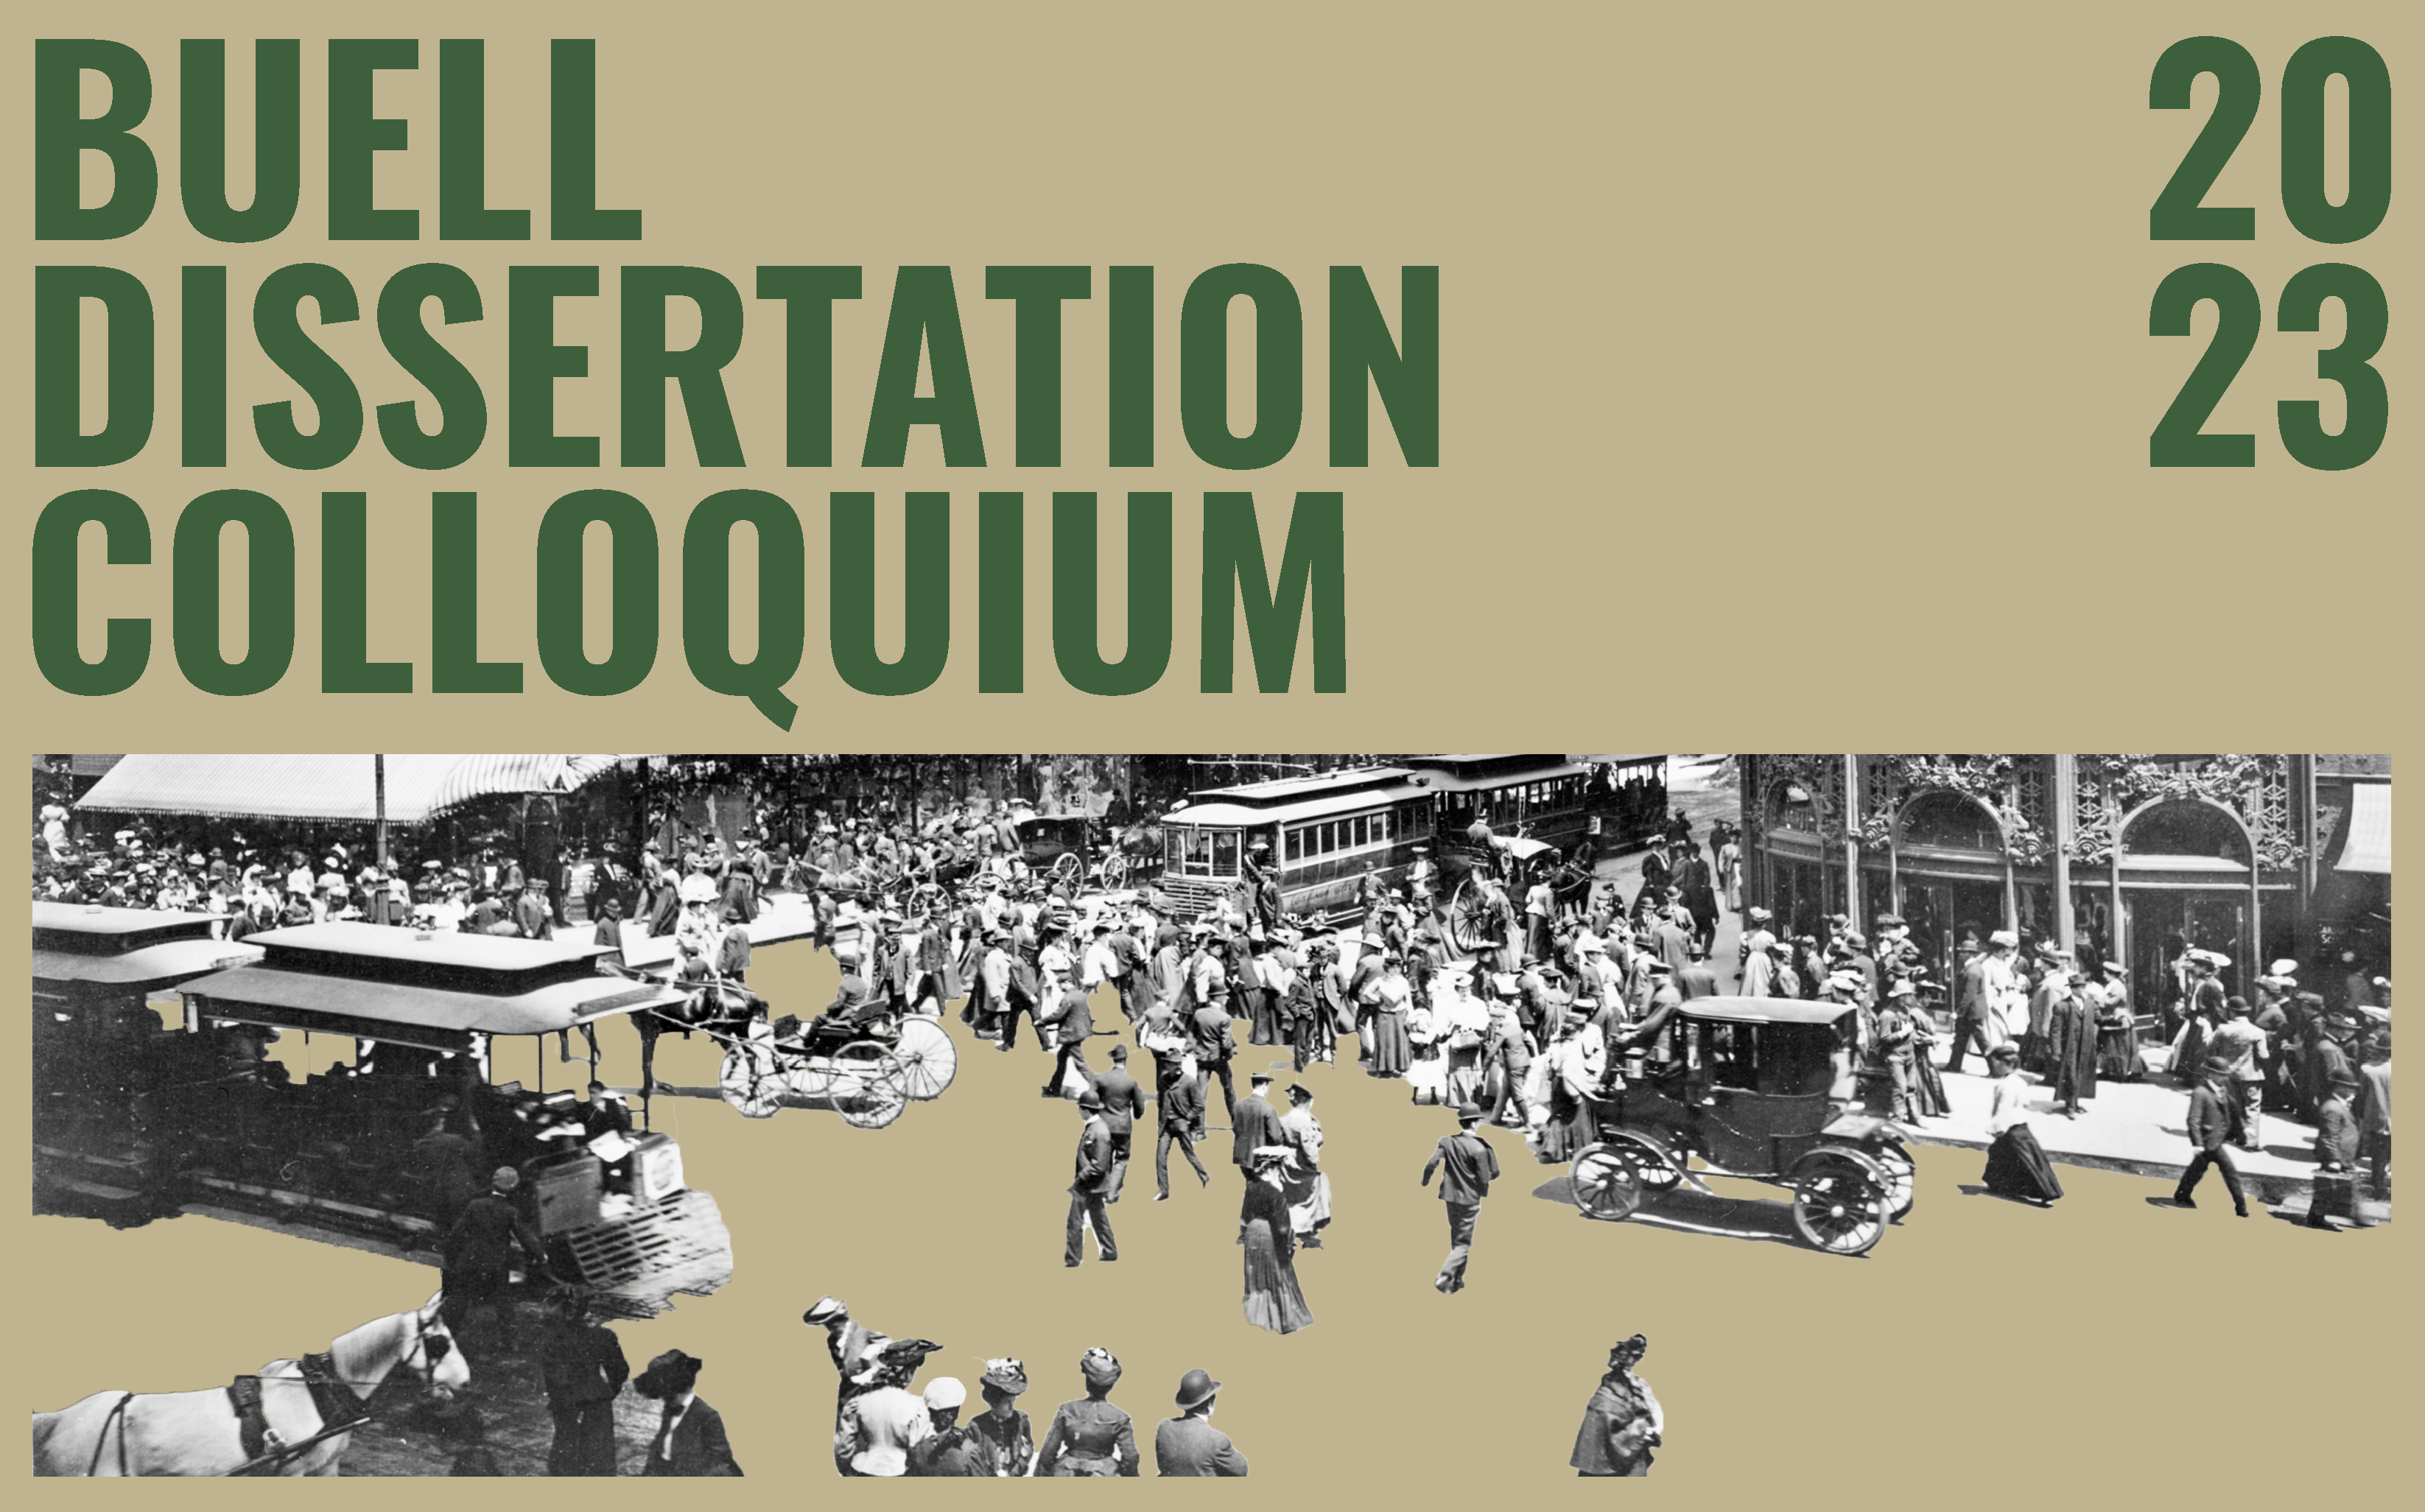 Green text on a beige backgrounds reads "Buell Dissertation Colloquium 2023." Below that a black-and-white image is cut up to reveal figures moving in an urban landscape, where the background streetscape has largely been removed. 